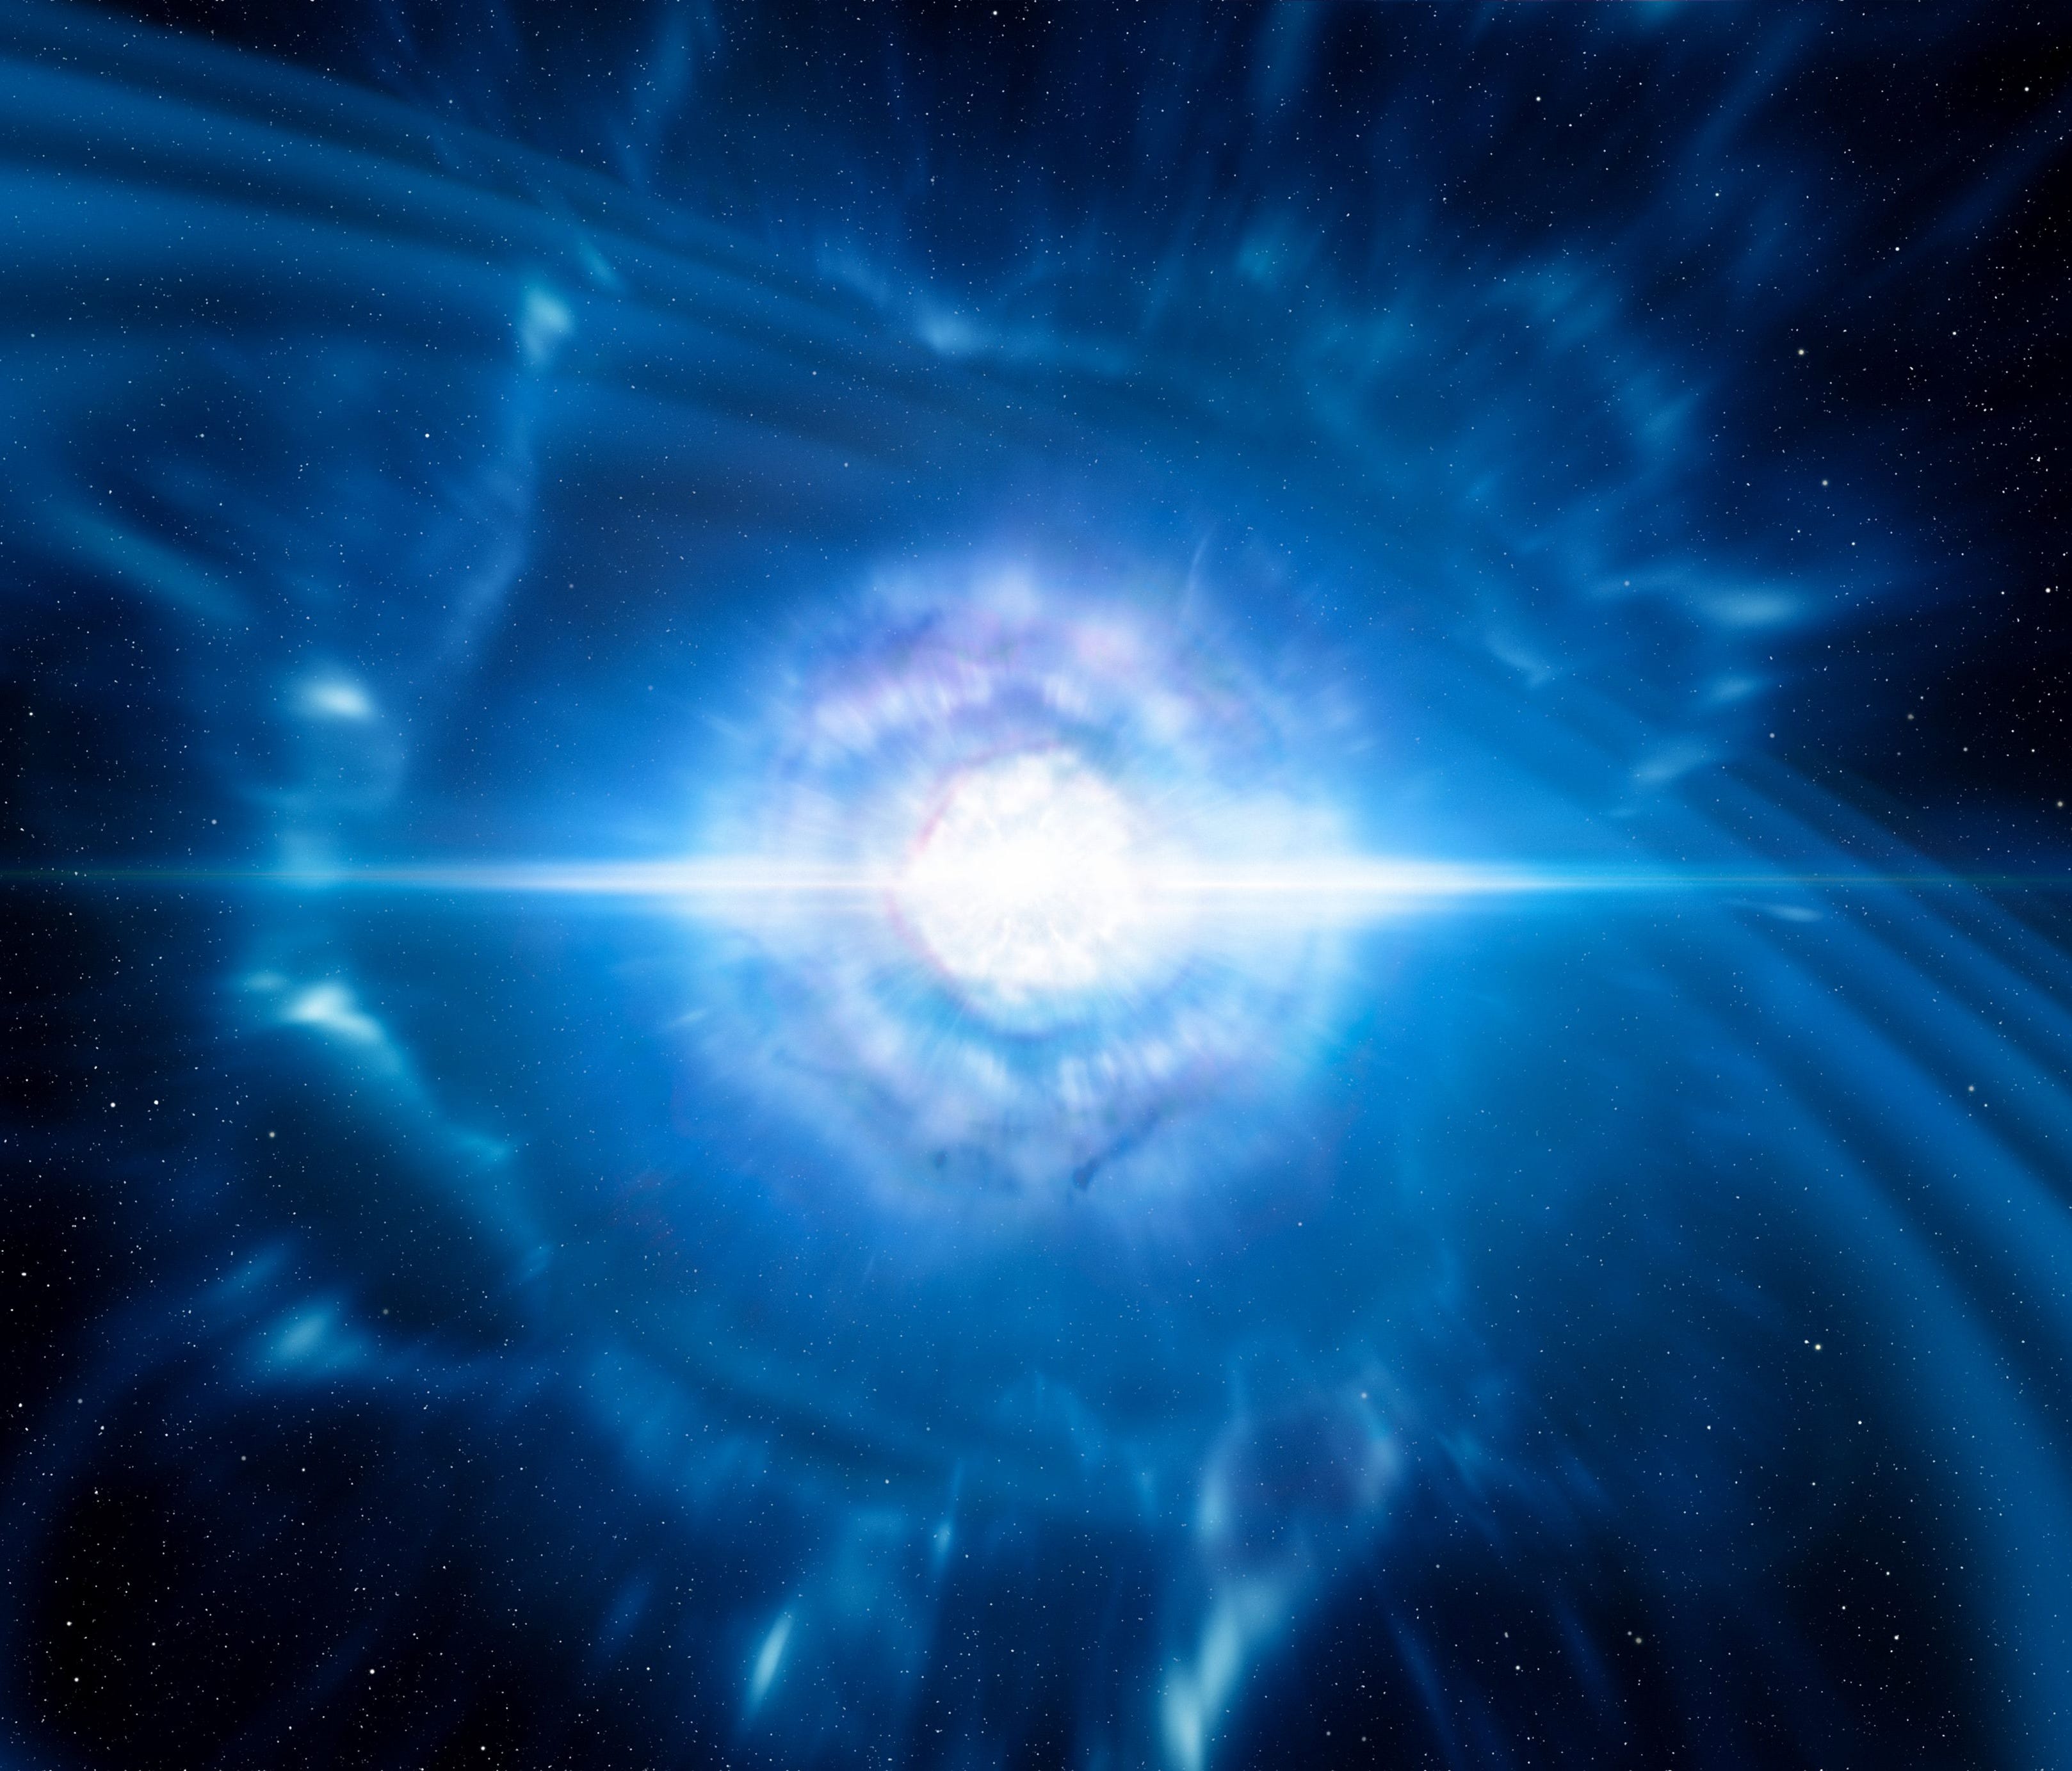 This handout image obtained from the European Southern Observatory on October 16, 2017 is an artists impression showing two tiny but very dense neutron stars at the point at which they merge and explode as a kilonova.